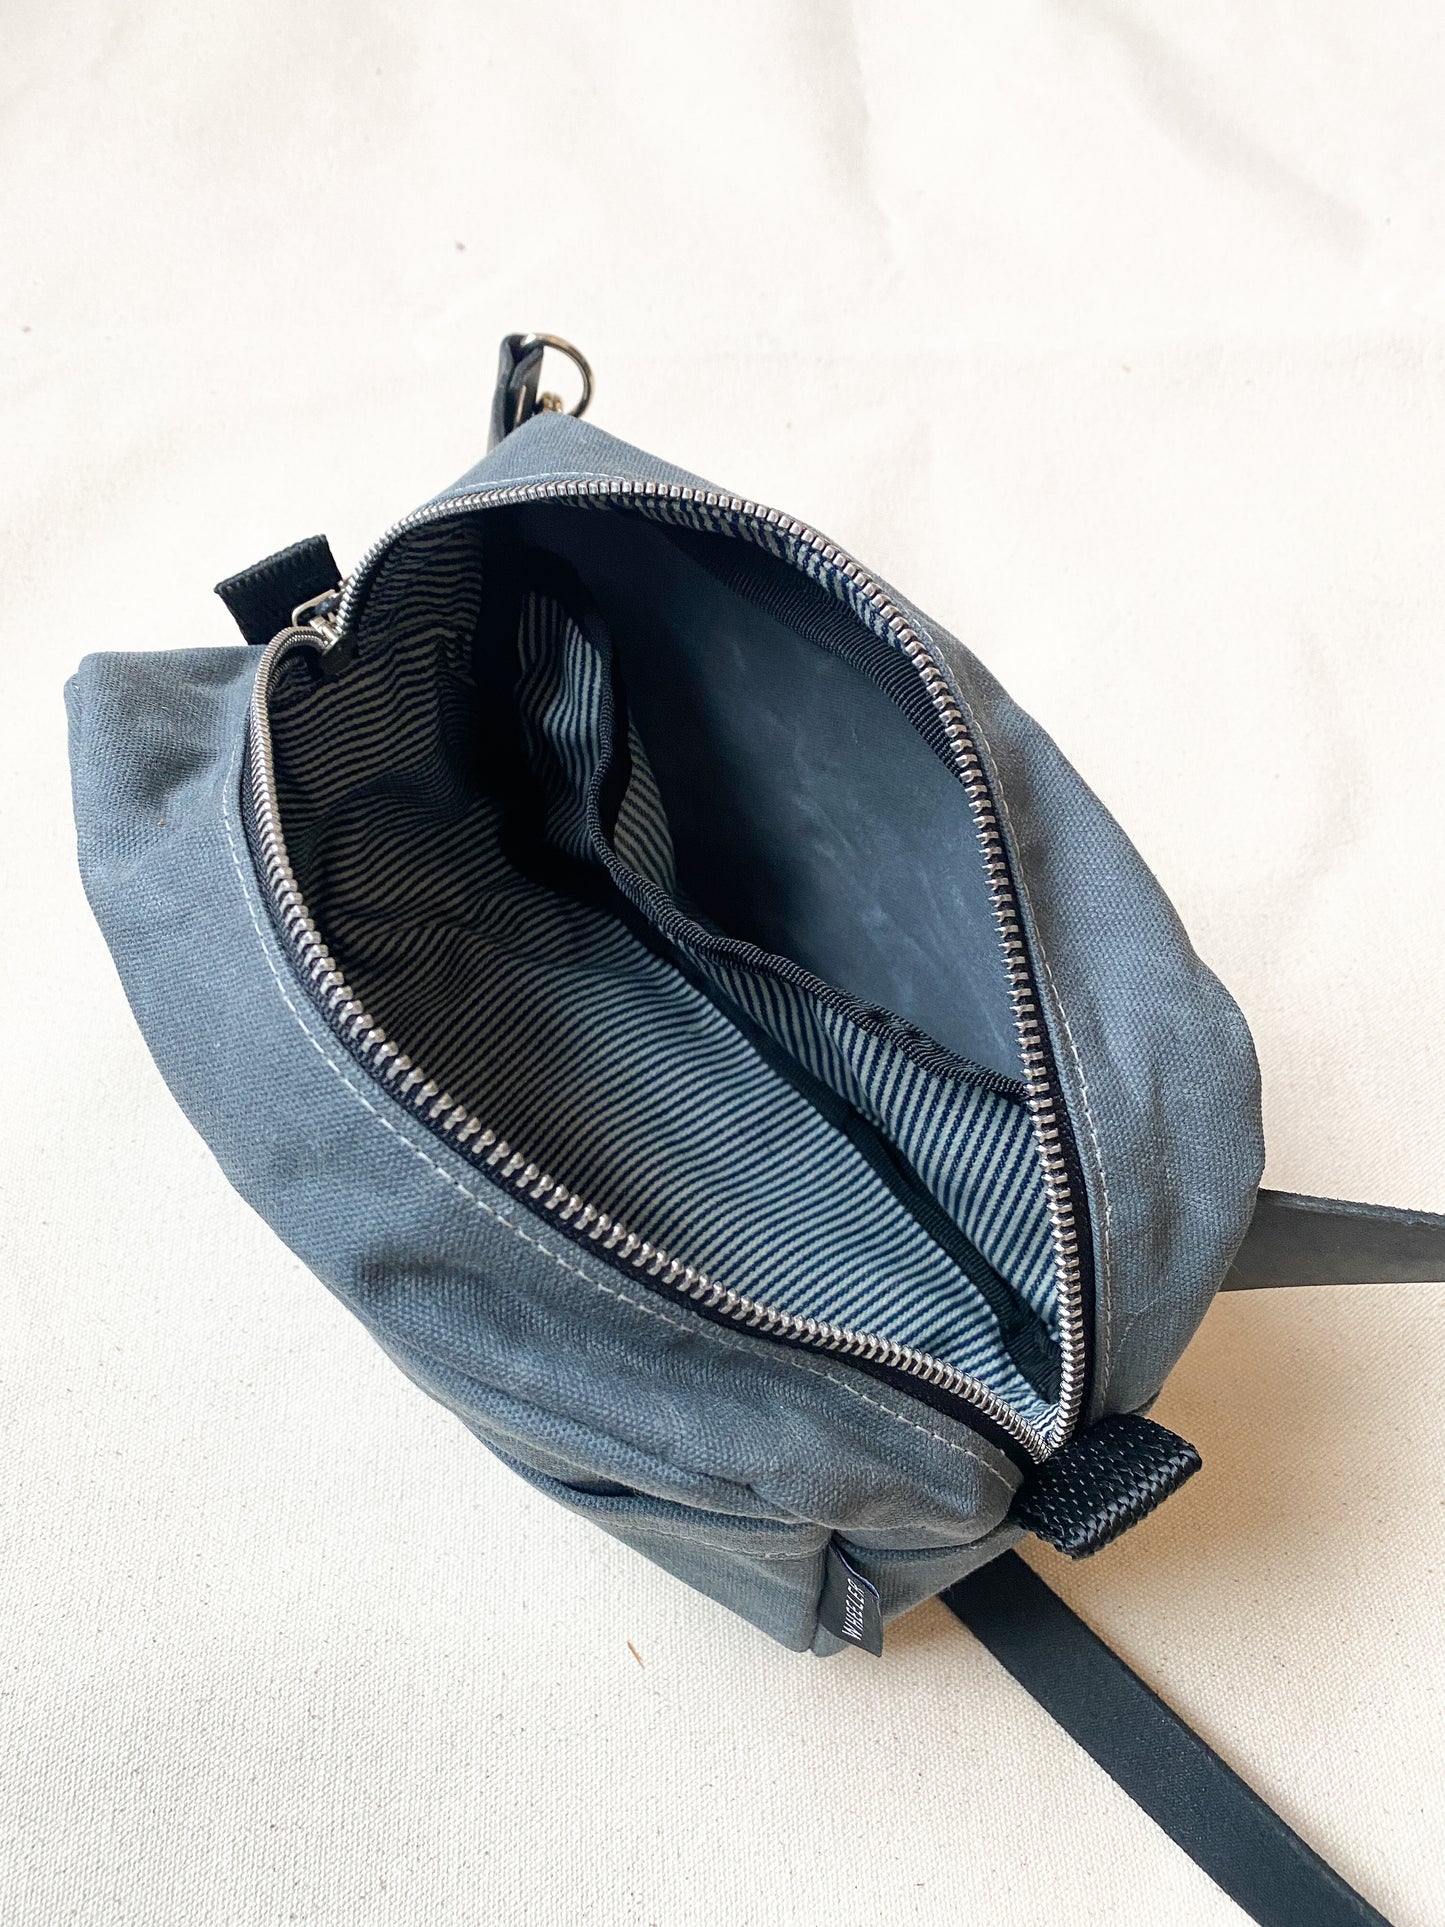 Interior view of Waxed Canvas cross body bag with leather strap. 